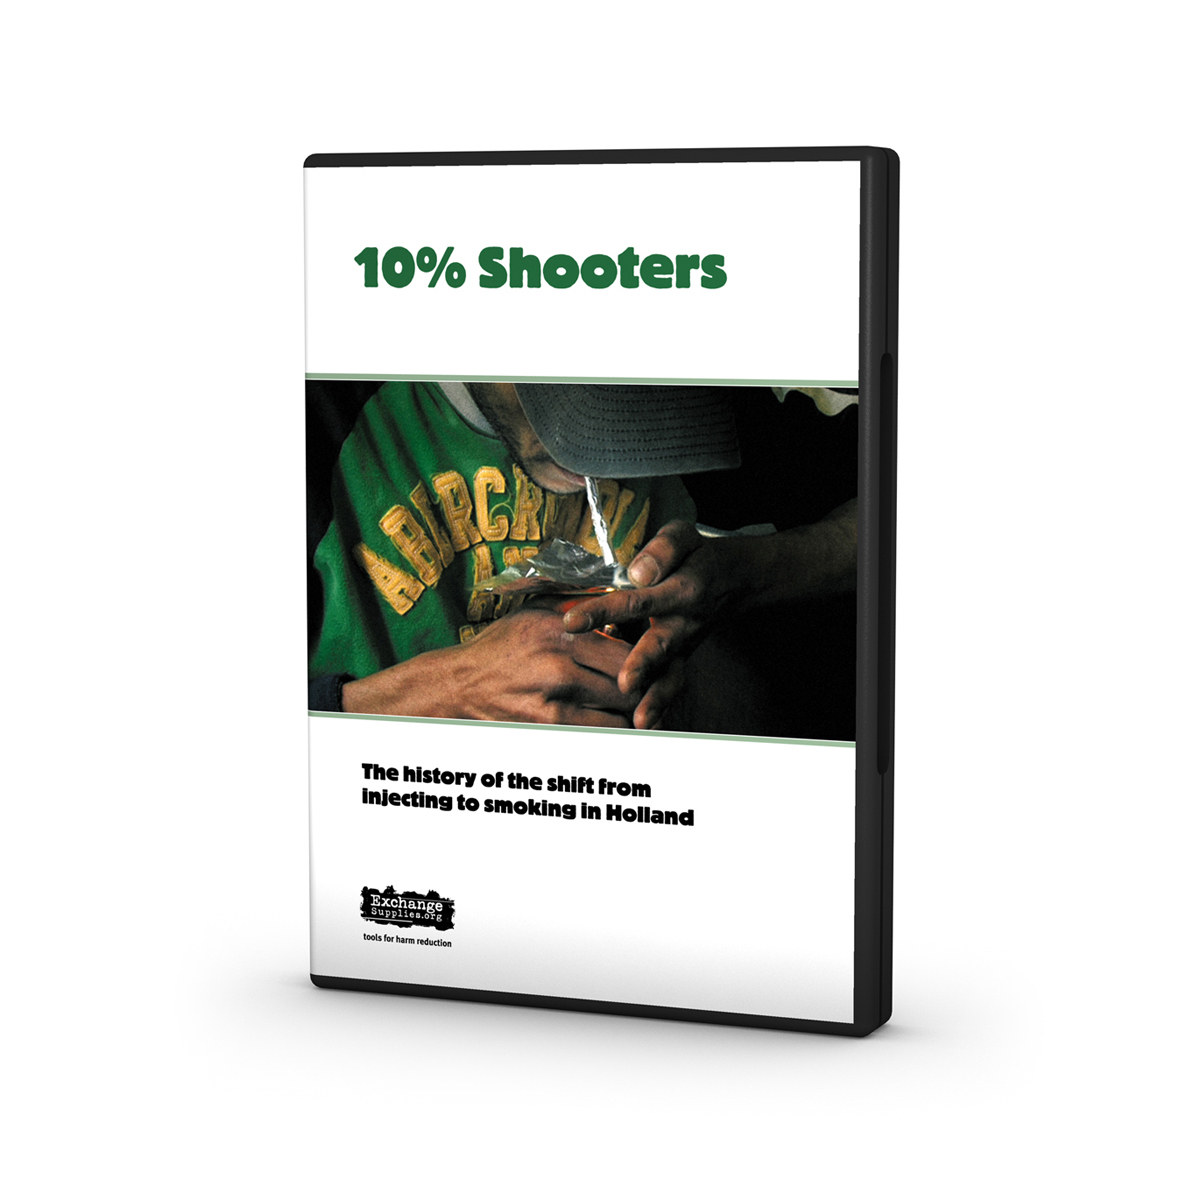 10% Shooters